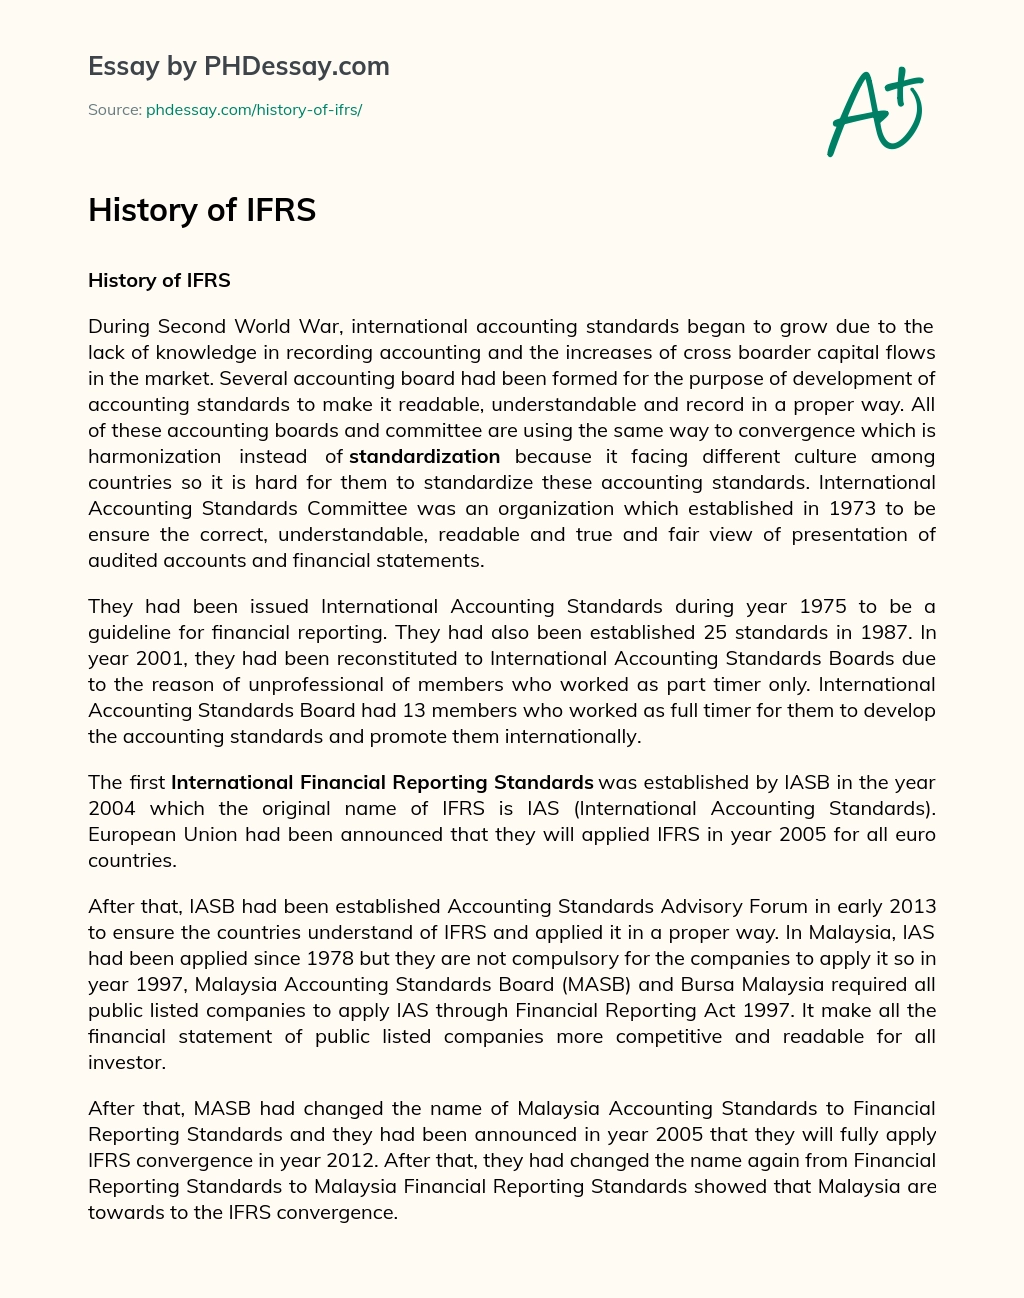 History of IFRS essay